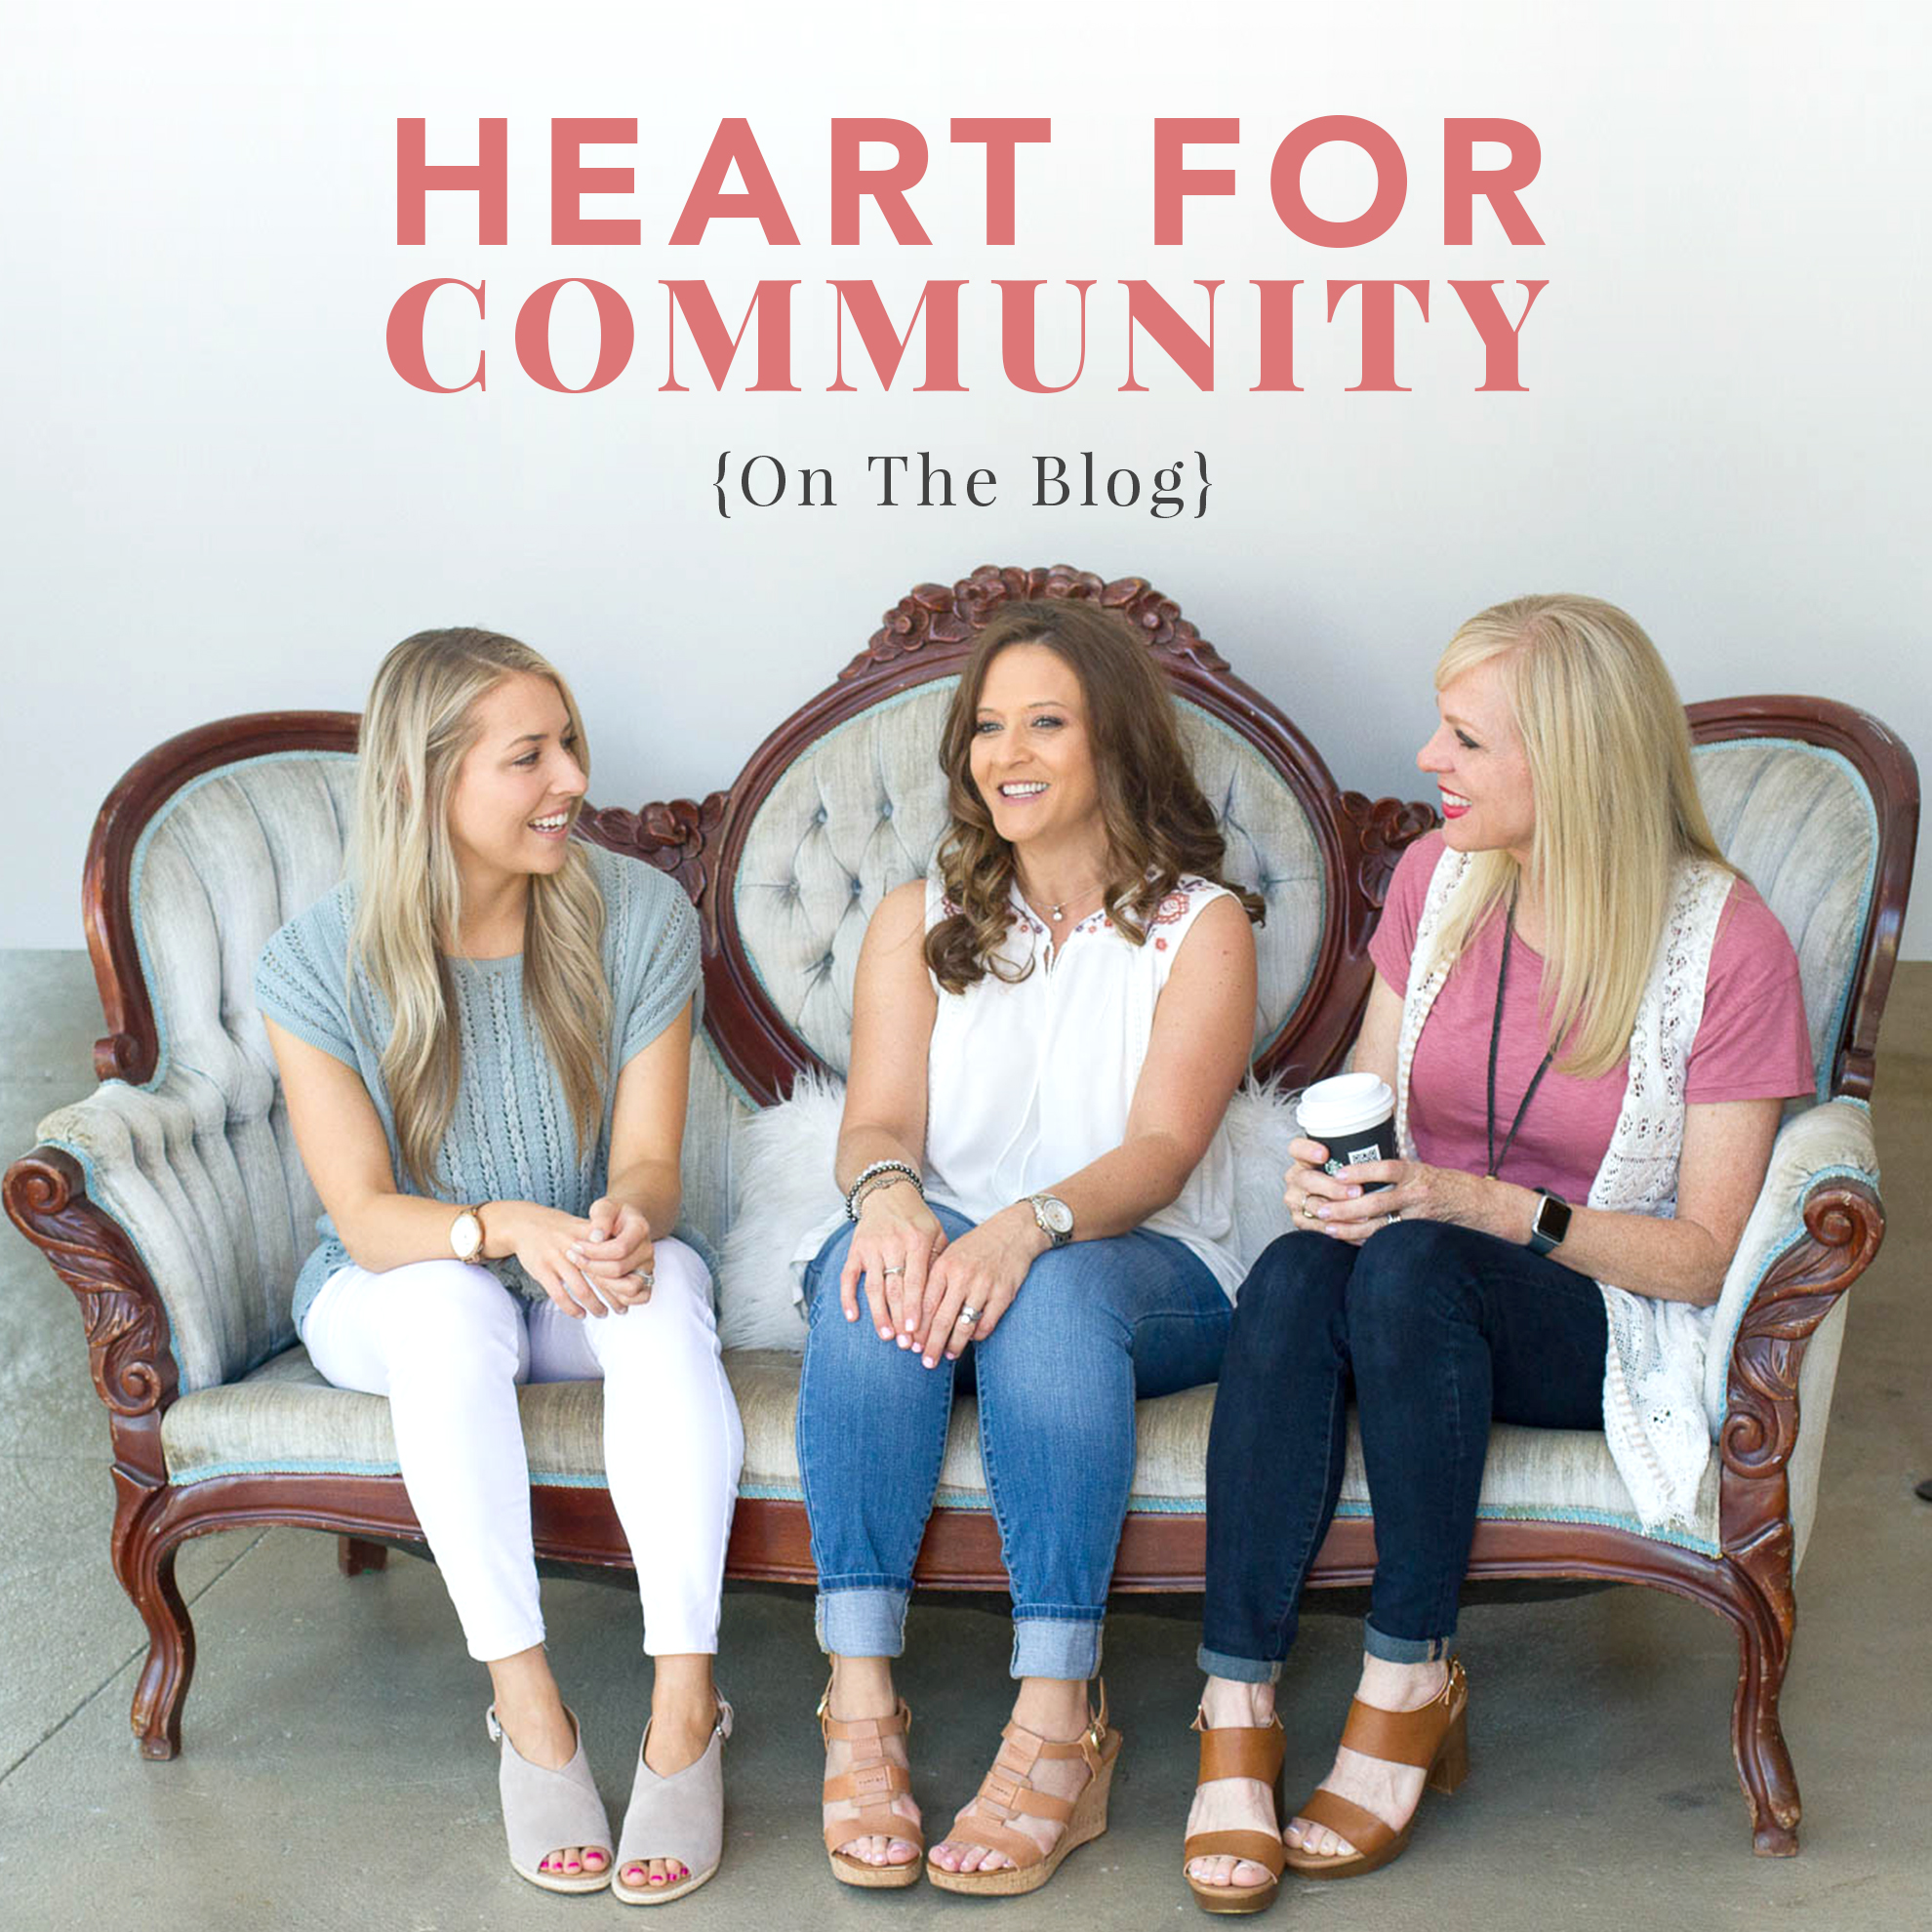 Heart for Community – She Works HIS Way